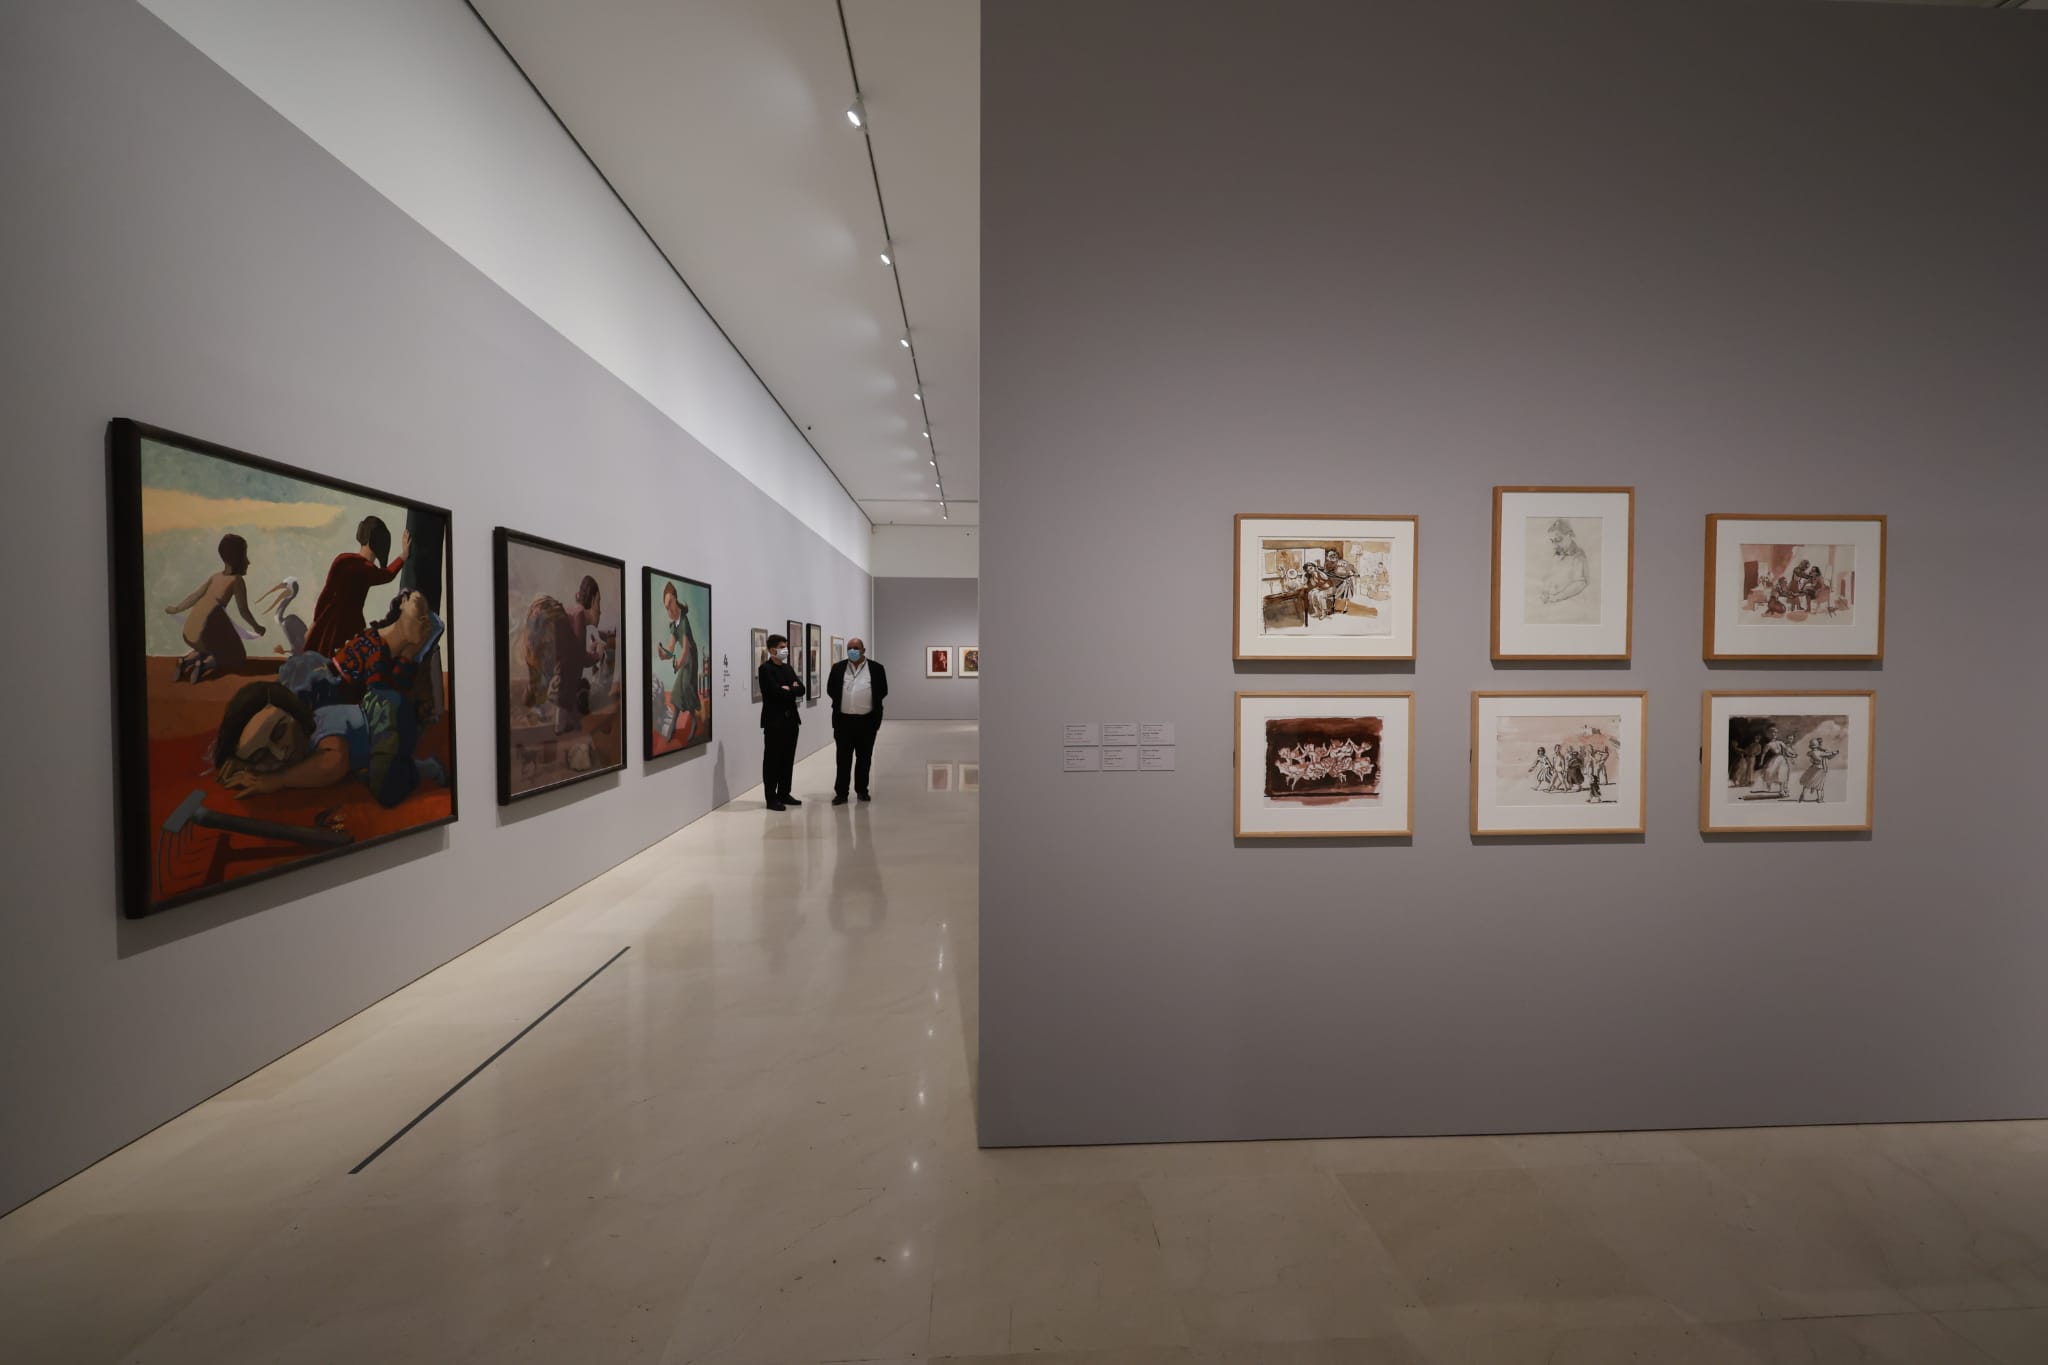 Work by Paula Rego is on display at the Malaga Picasso museum until 21 August 2022.